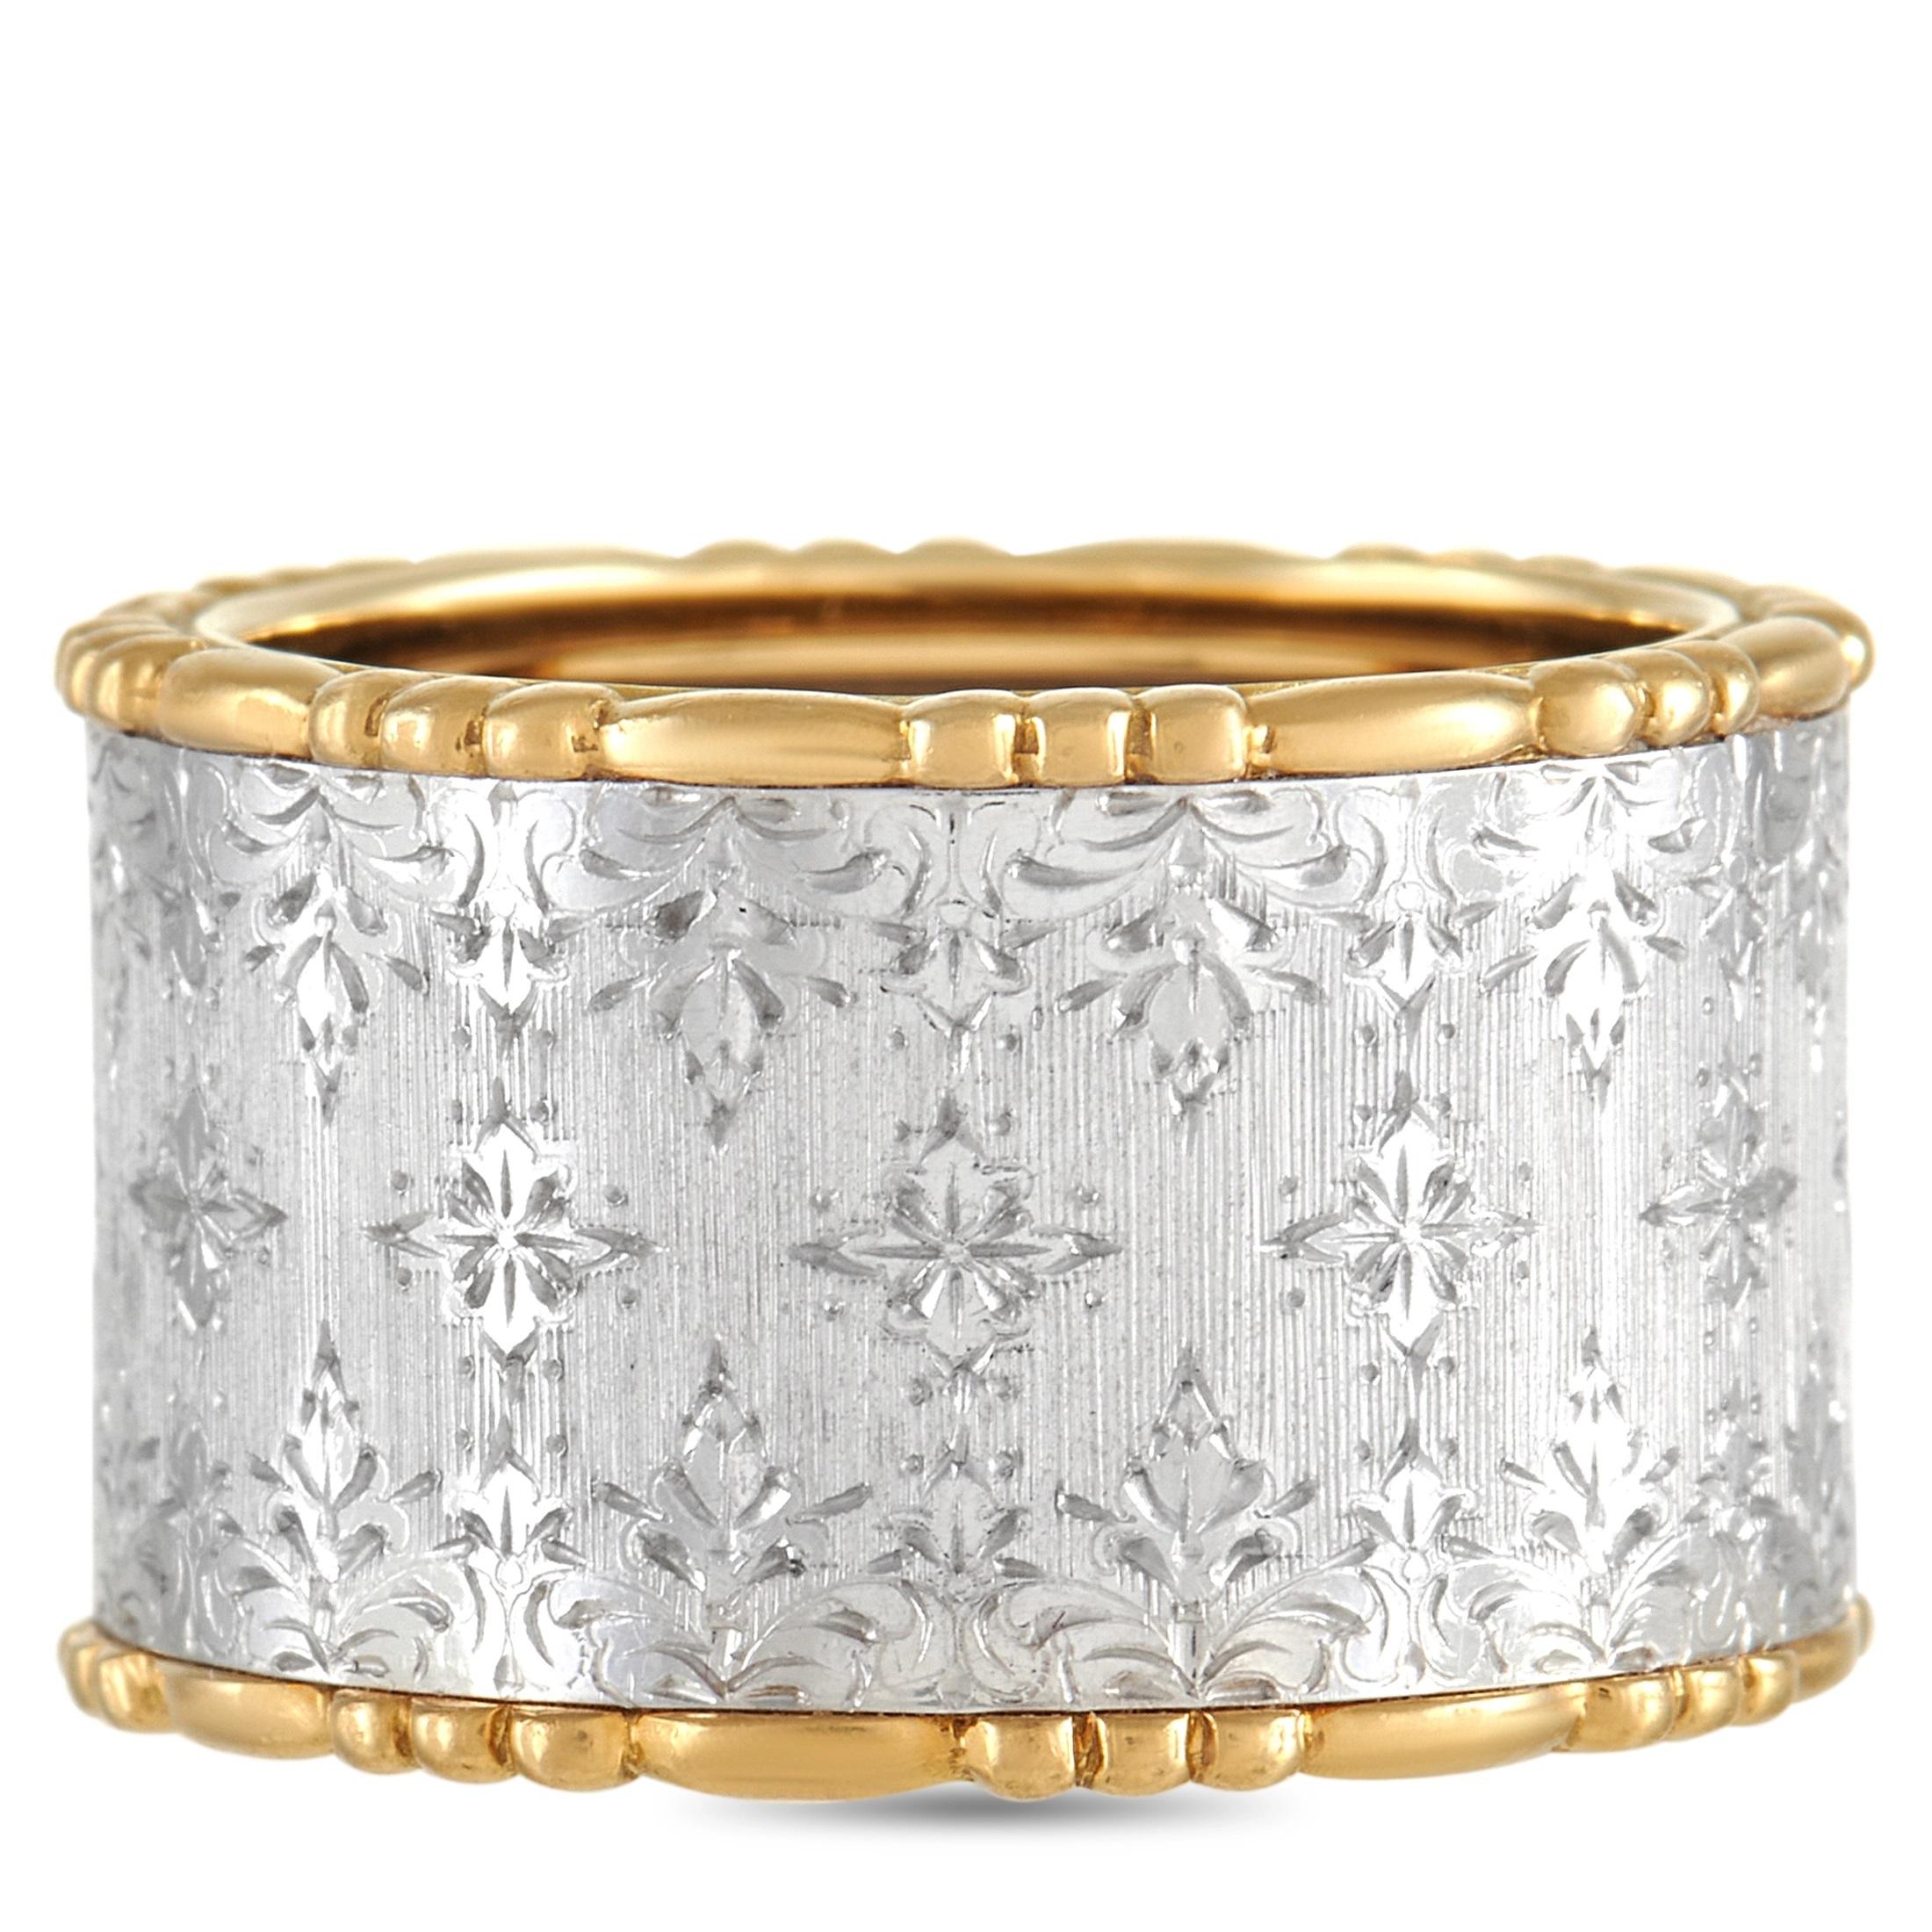 Women's Buccellati 18K White and Yellow Gold Wide Band Ring